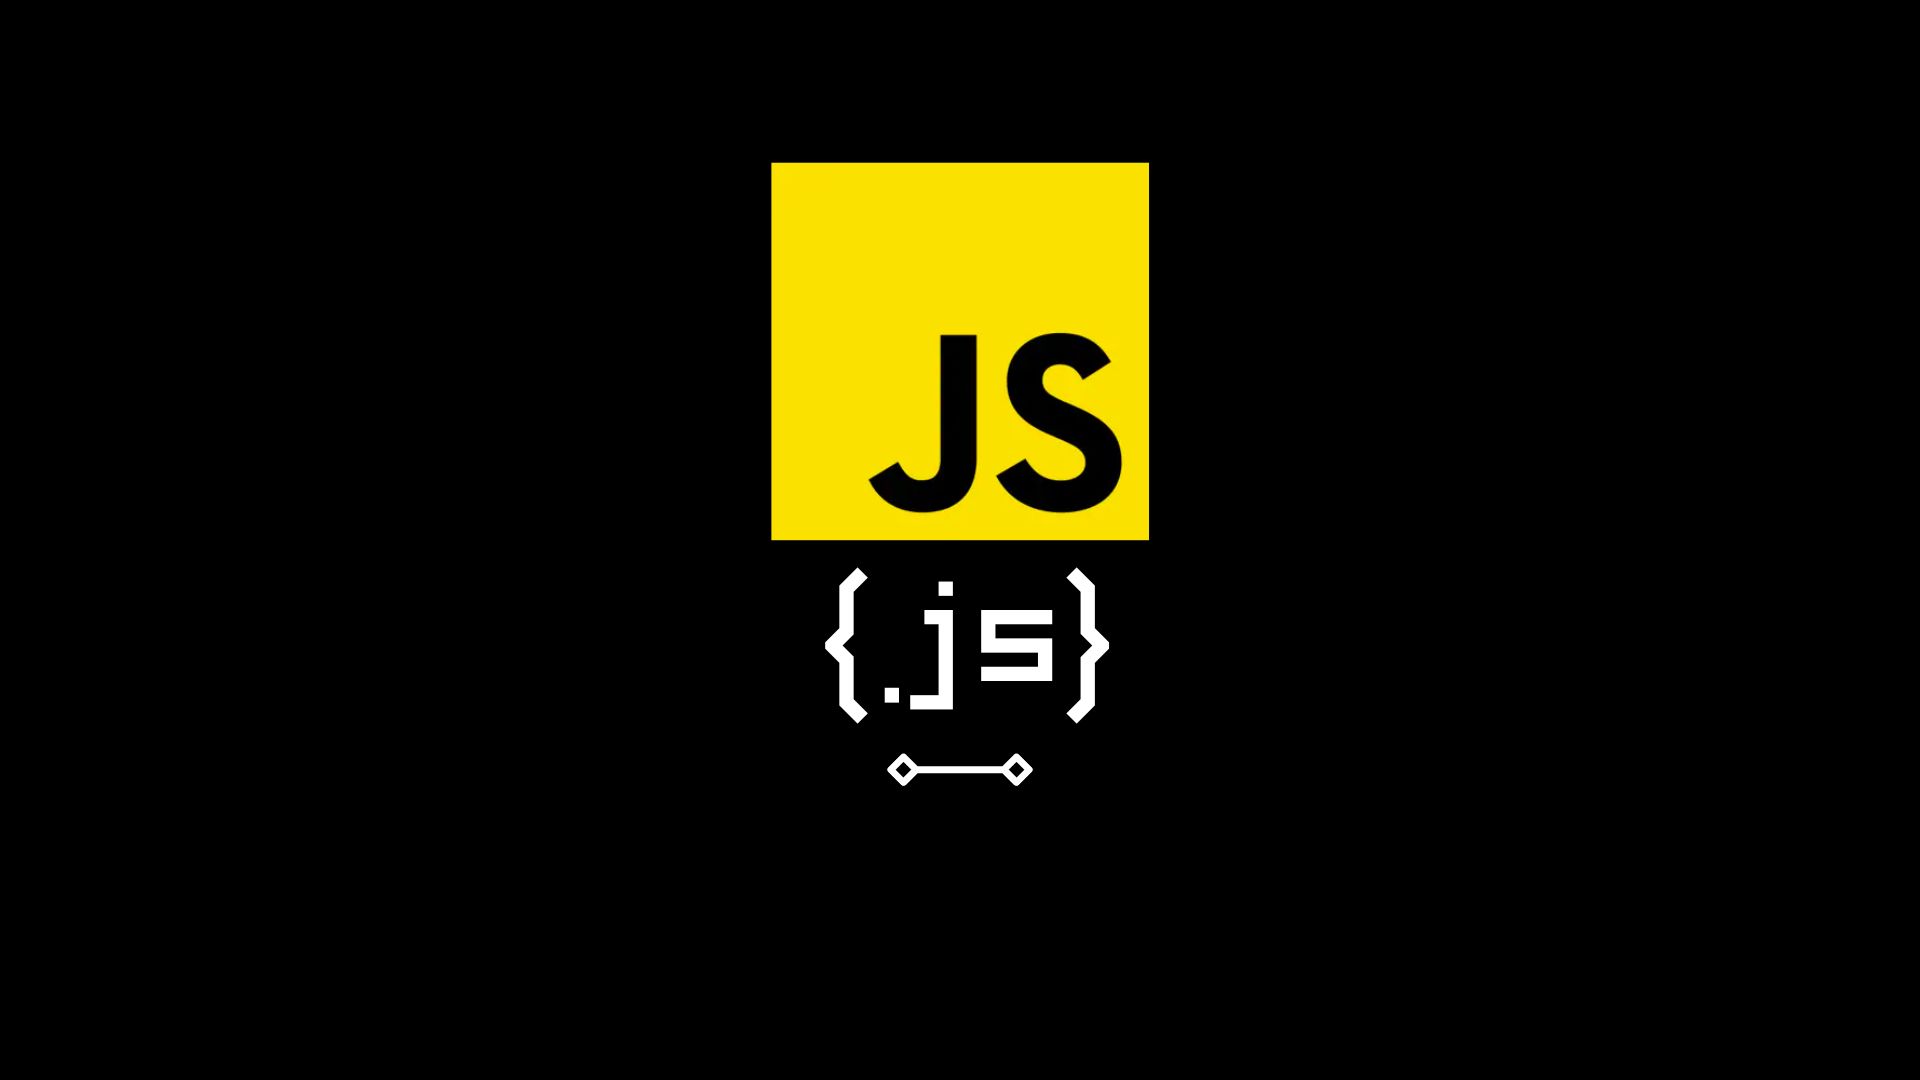 How to convert all Array values to LowerCase in JavaScript or with lodash